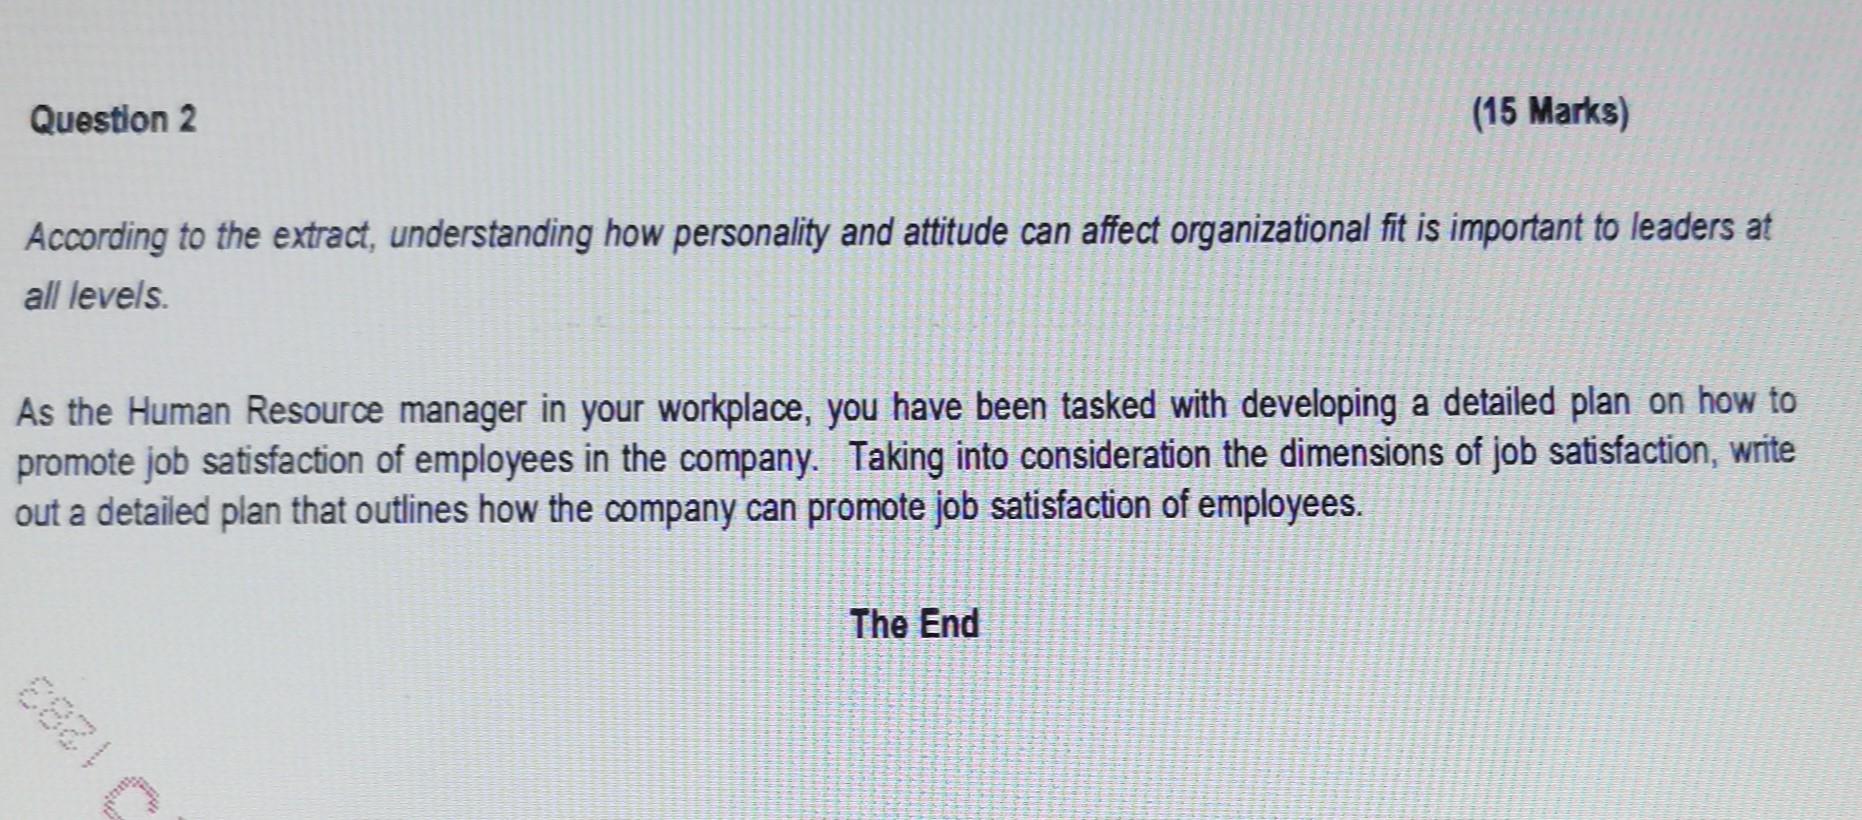 Question 2 According to the extract, understanding how personality and attitude can affect organizational fit